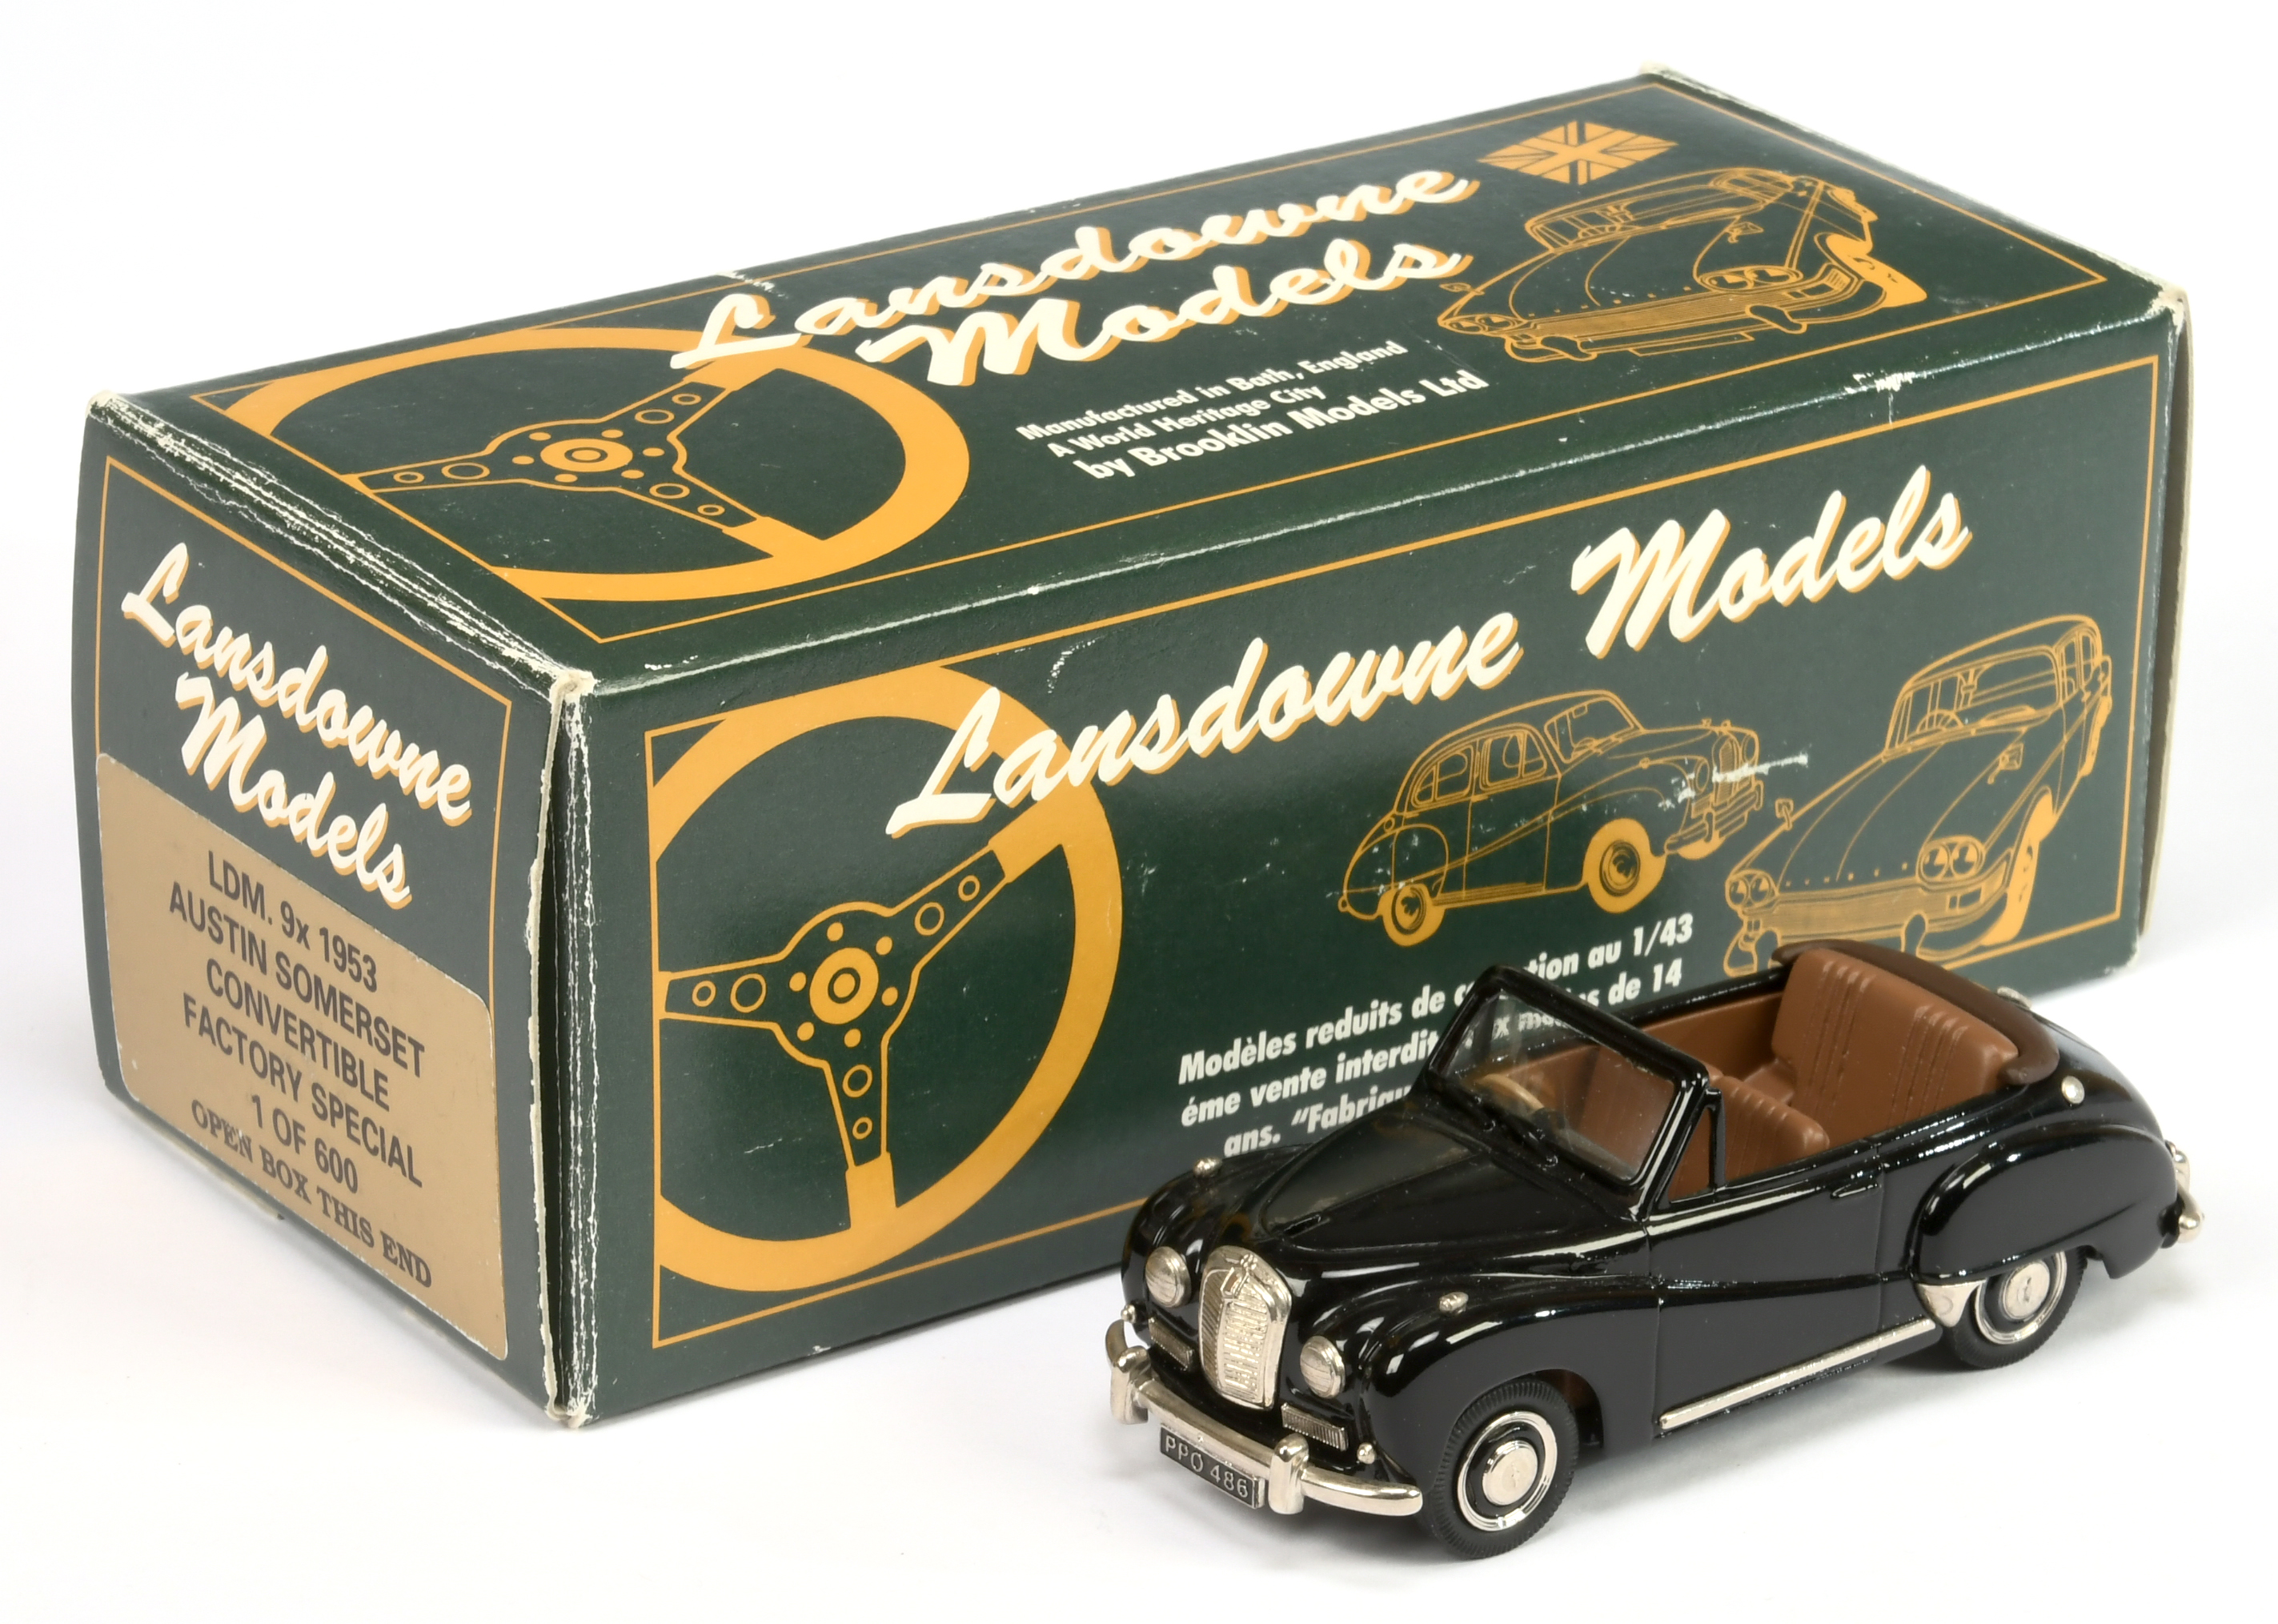 Lansdowne Models LDM9X 1953 Austin Somerset Convertible - factory special, one of 600 - black wit...